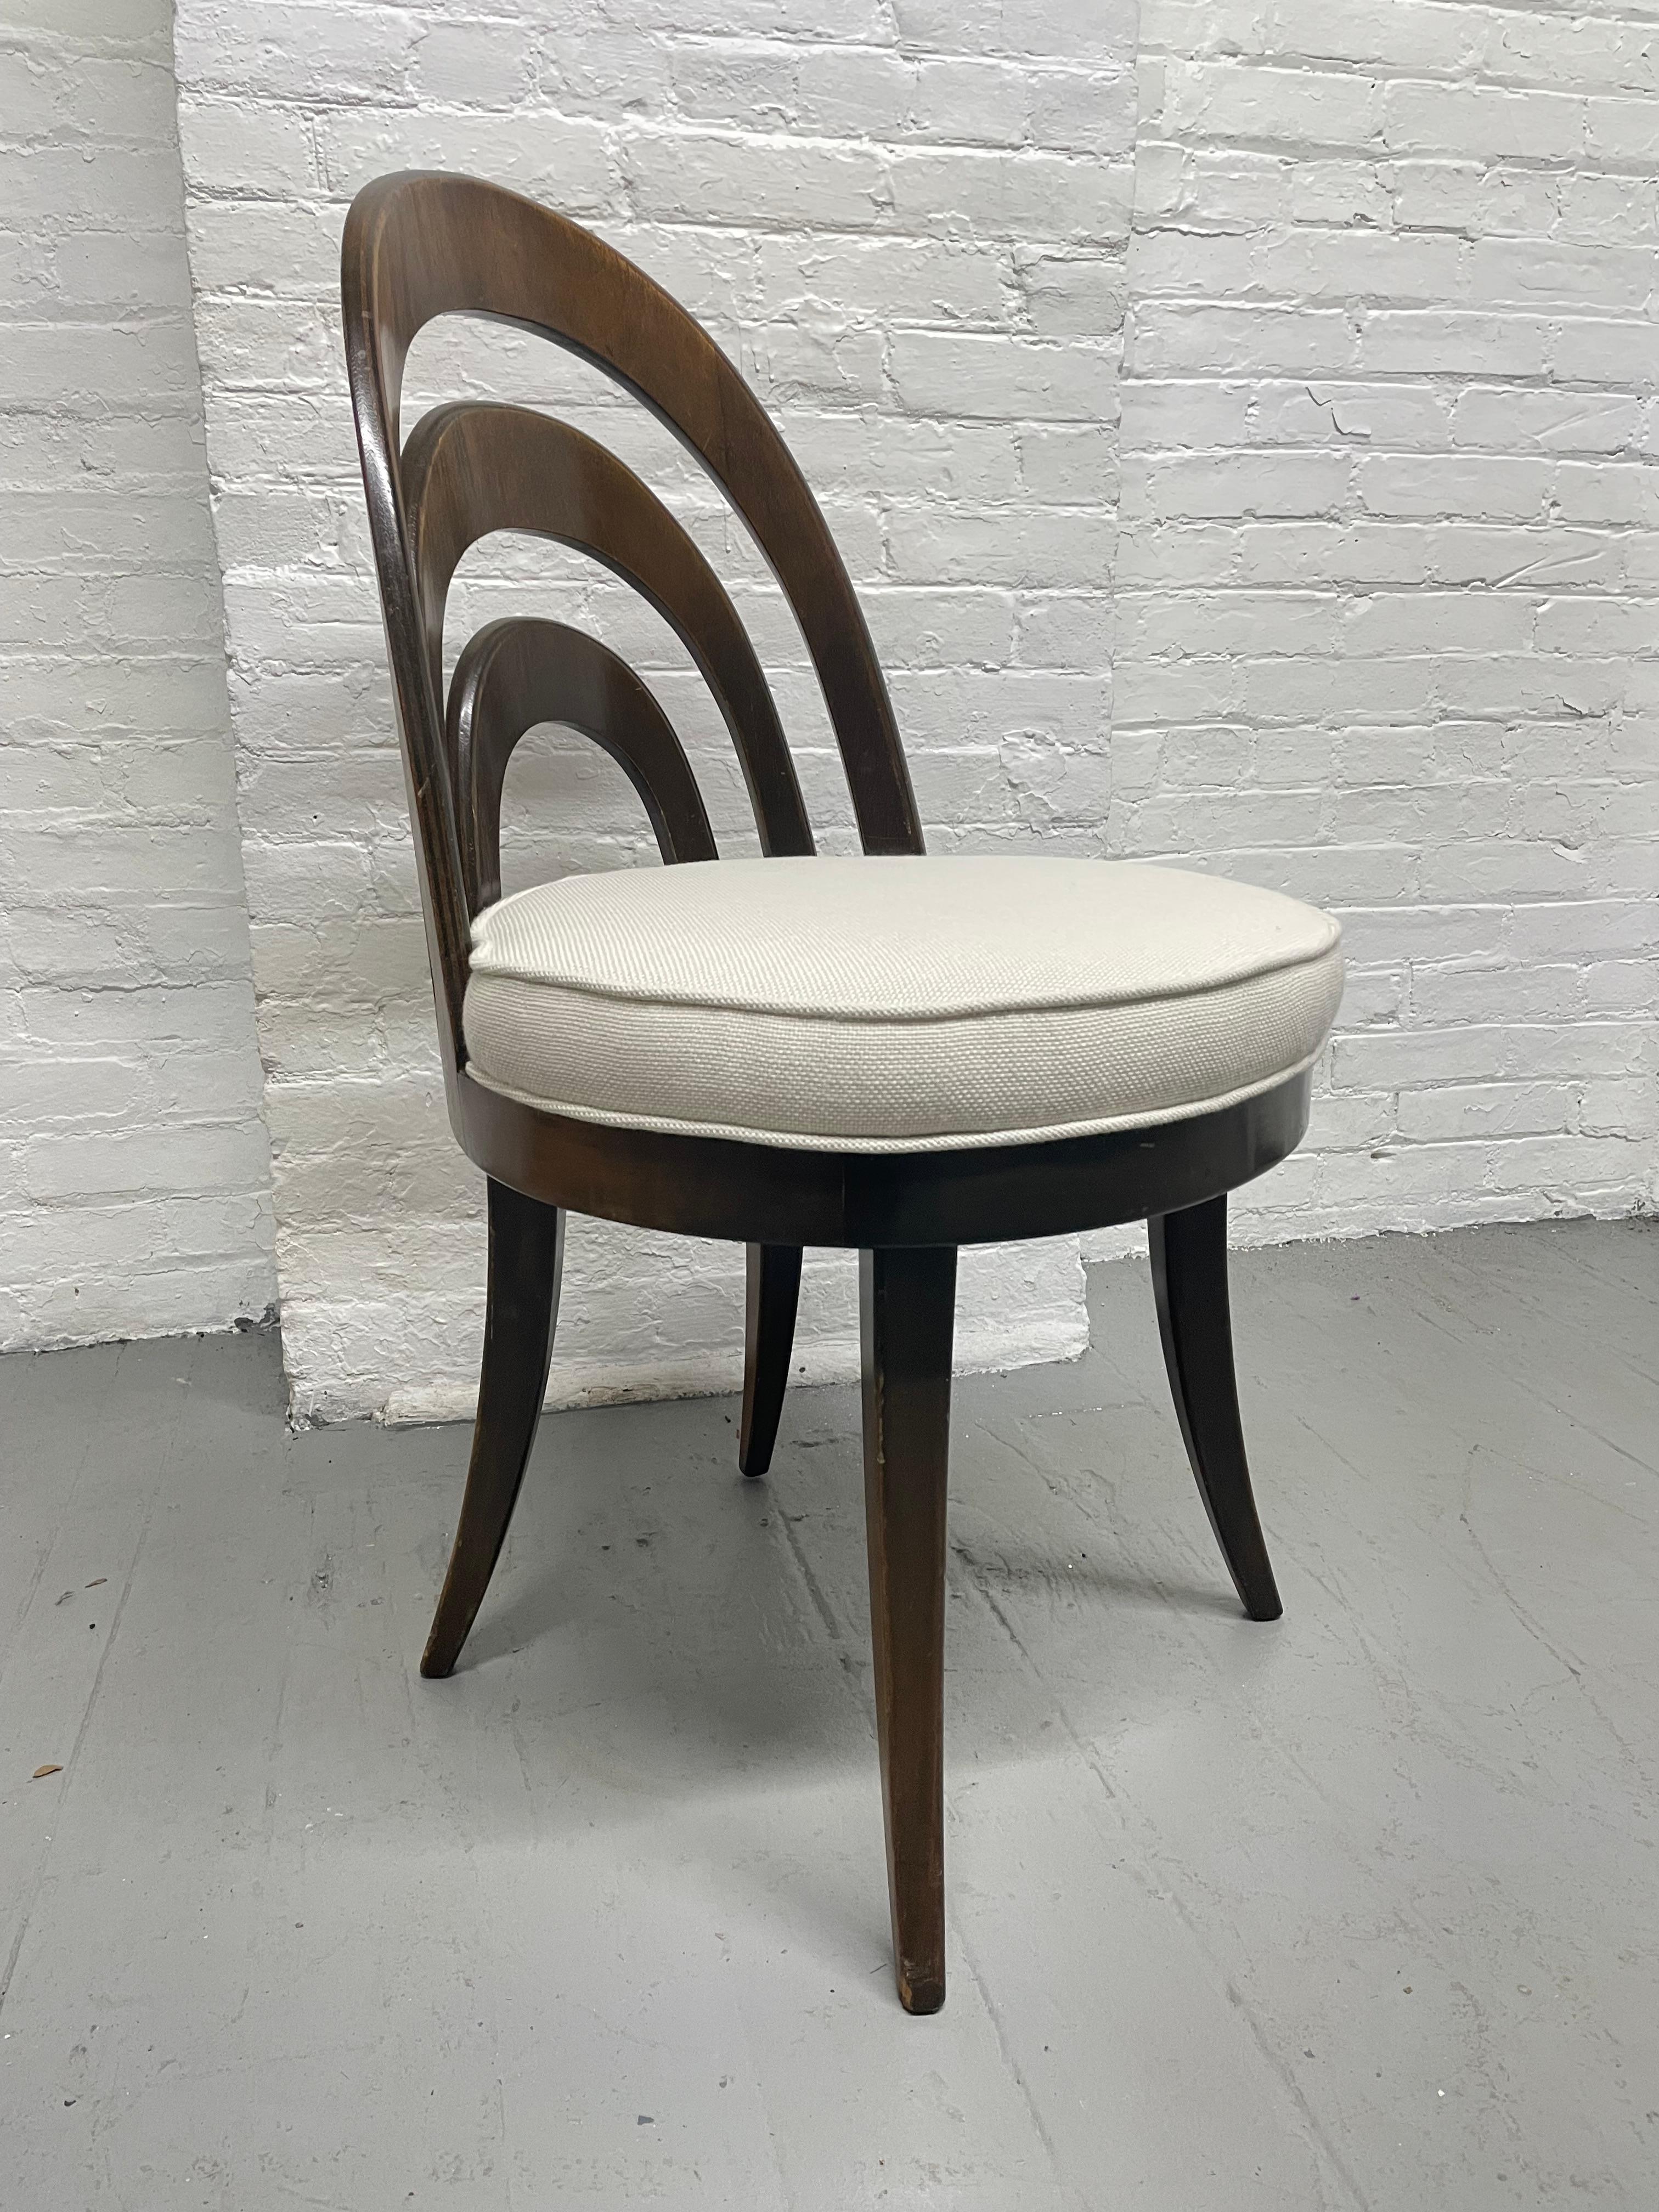 Mid-20th Century 1950s Harvey Probber Dining Chairs For Sale